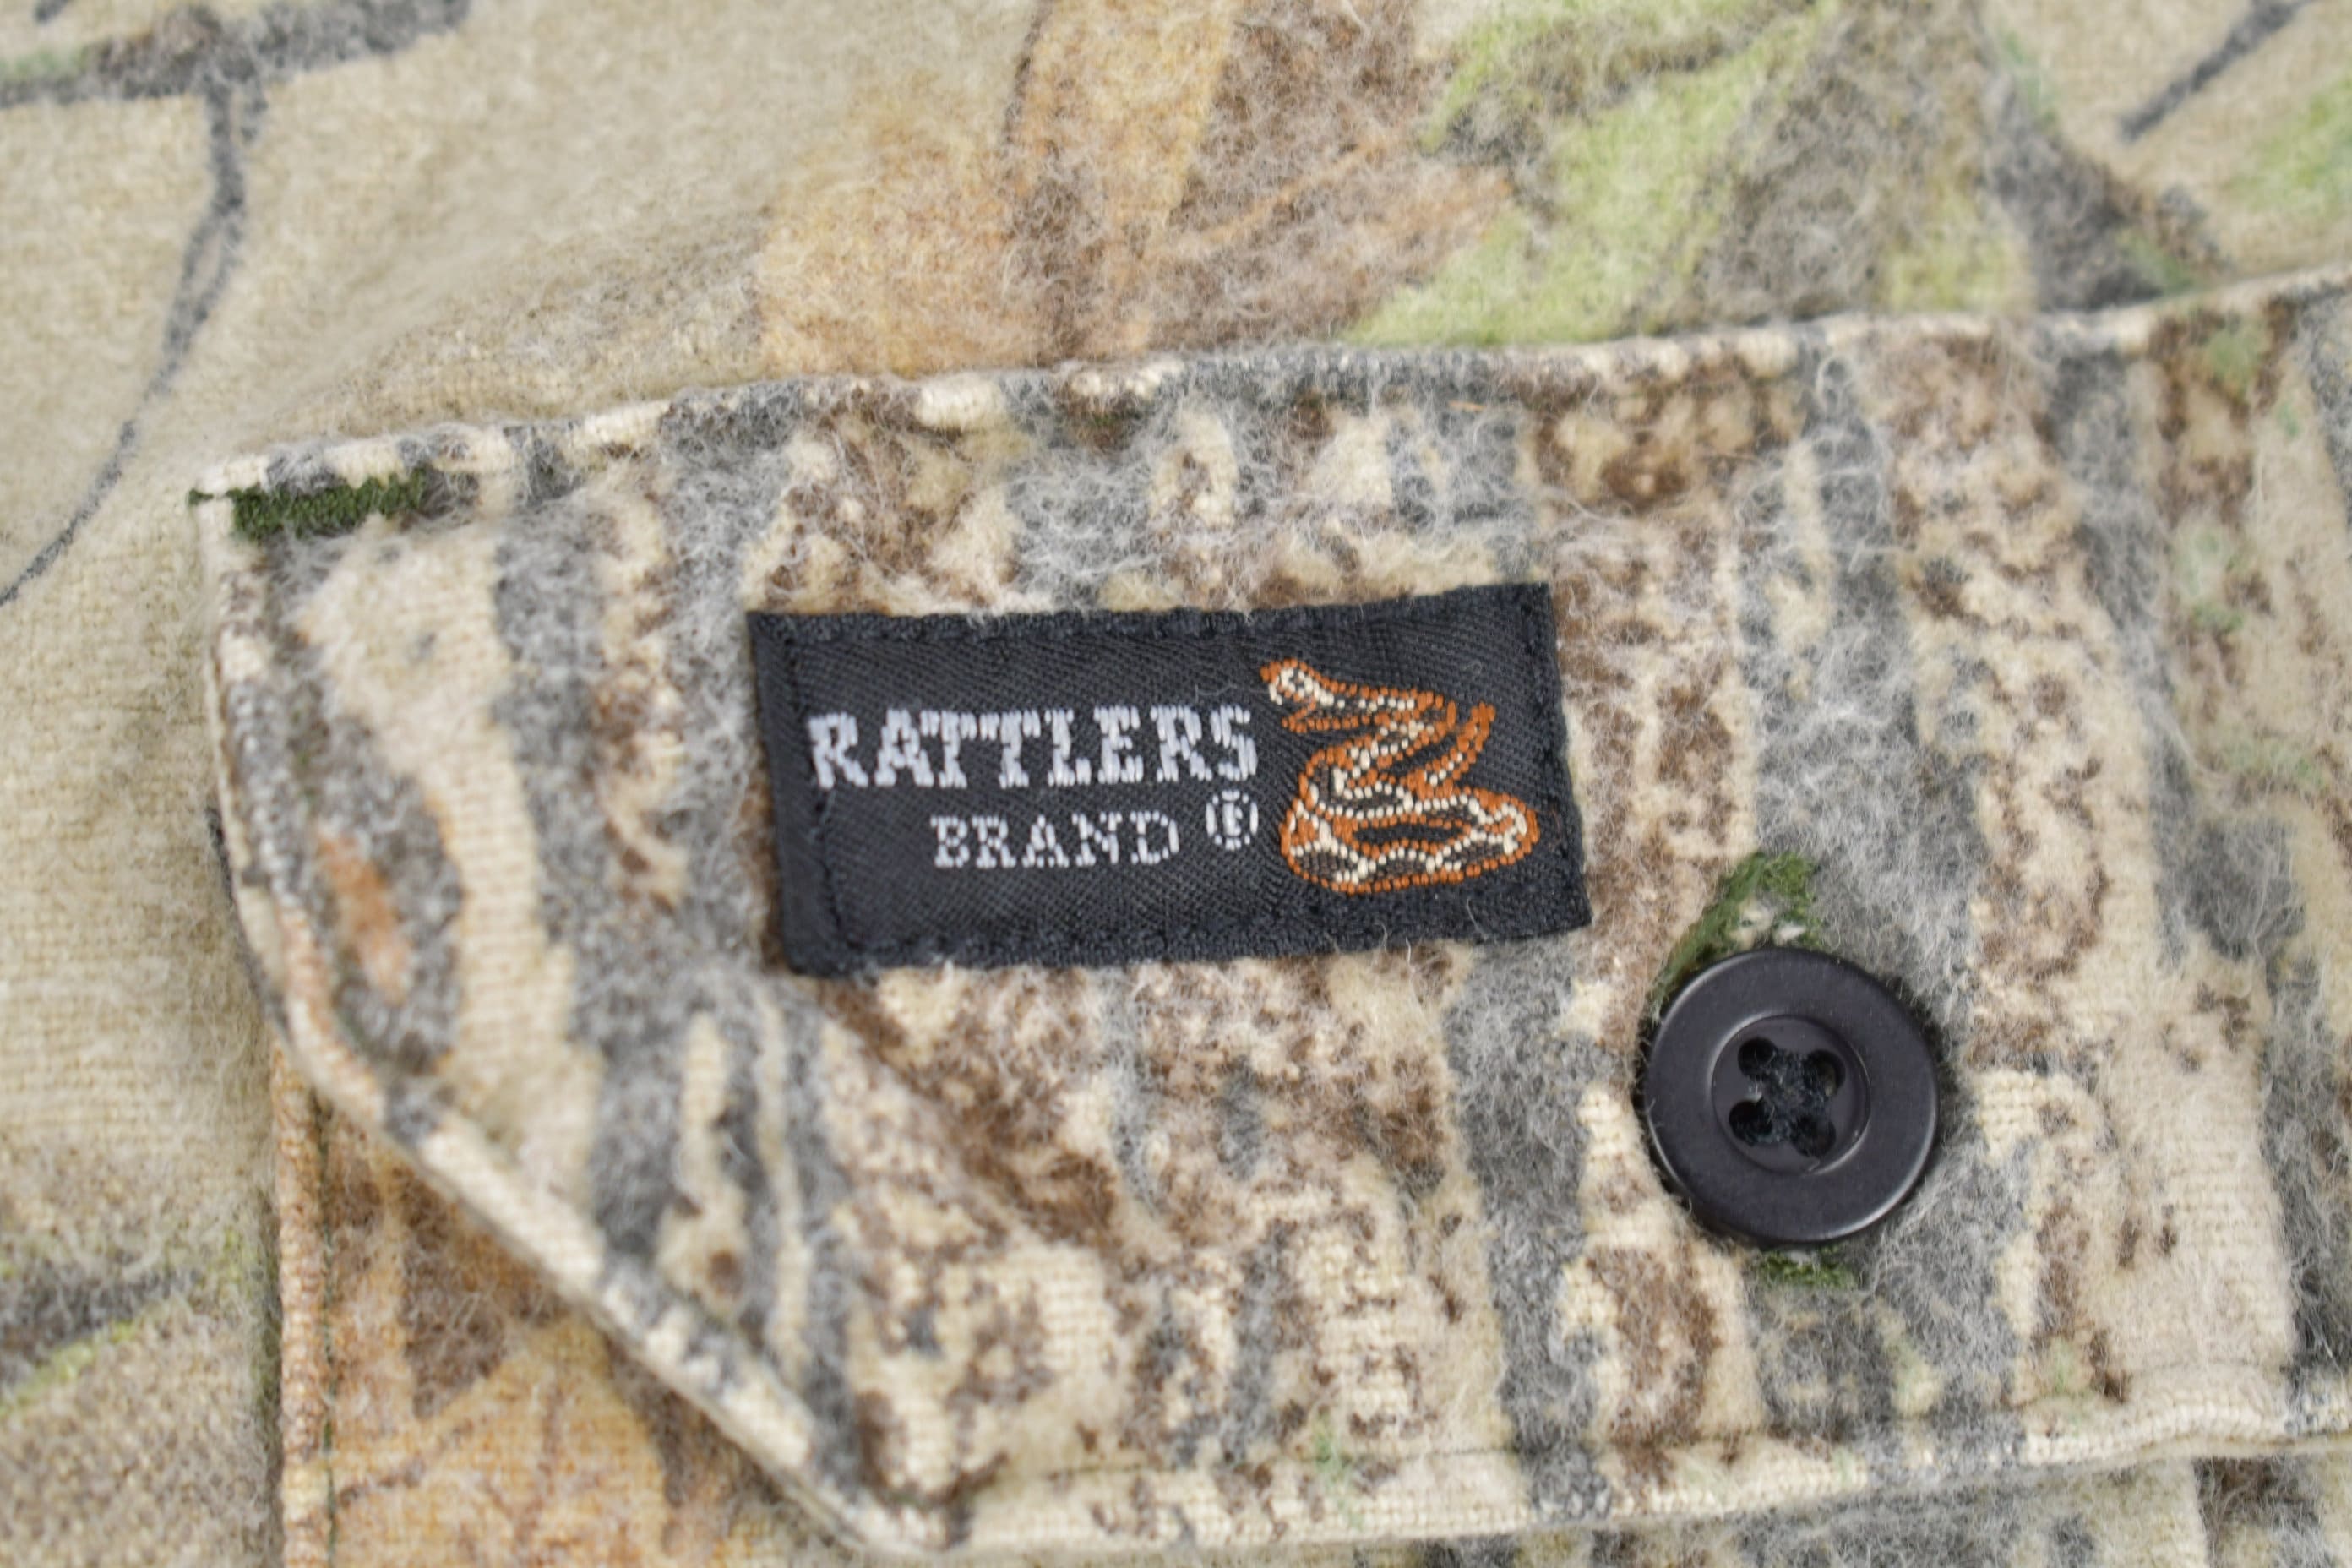 Vintage 1990s Rattlers Brand Real Tree Camo Button up Shirt